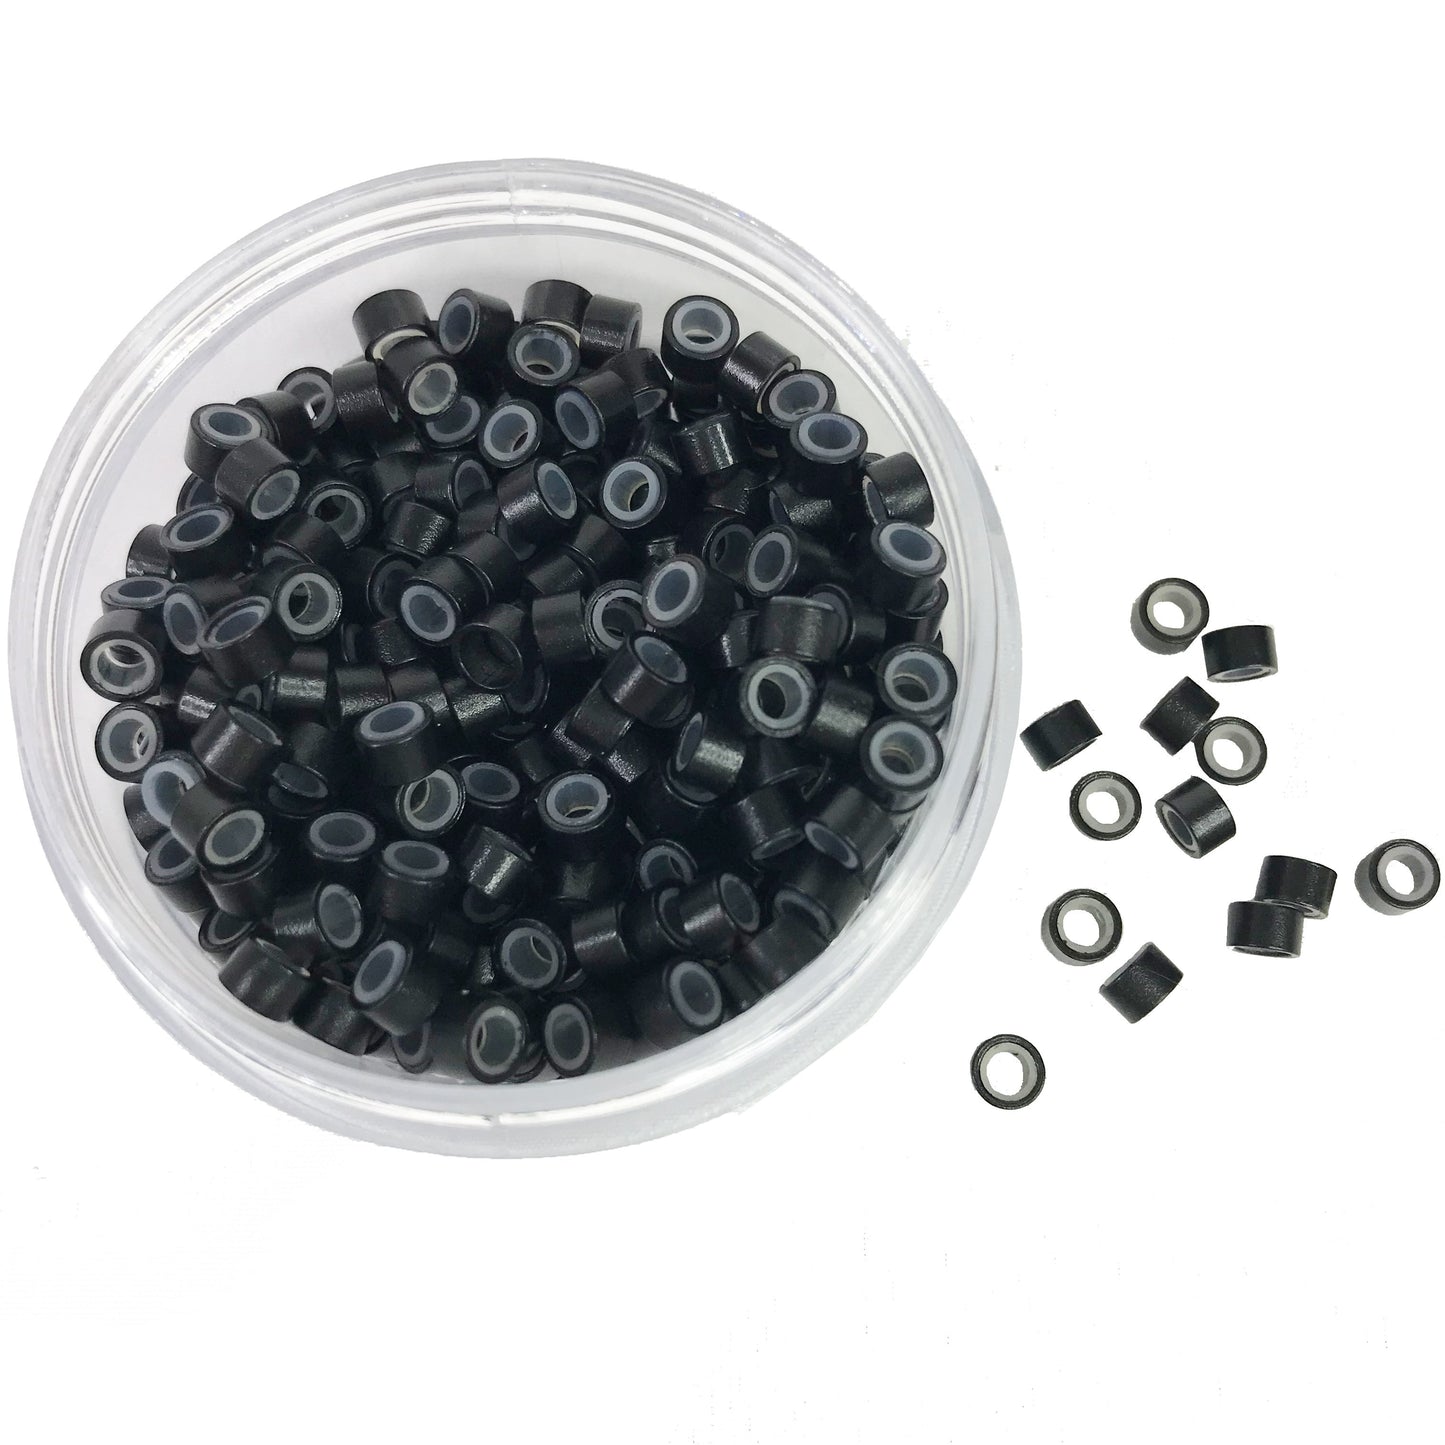 Silicone Micro Link Rings 5mm Lined Beads for Hair Extensions Tool Black